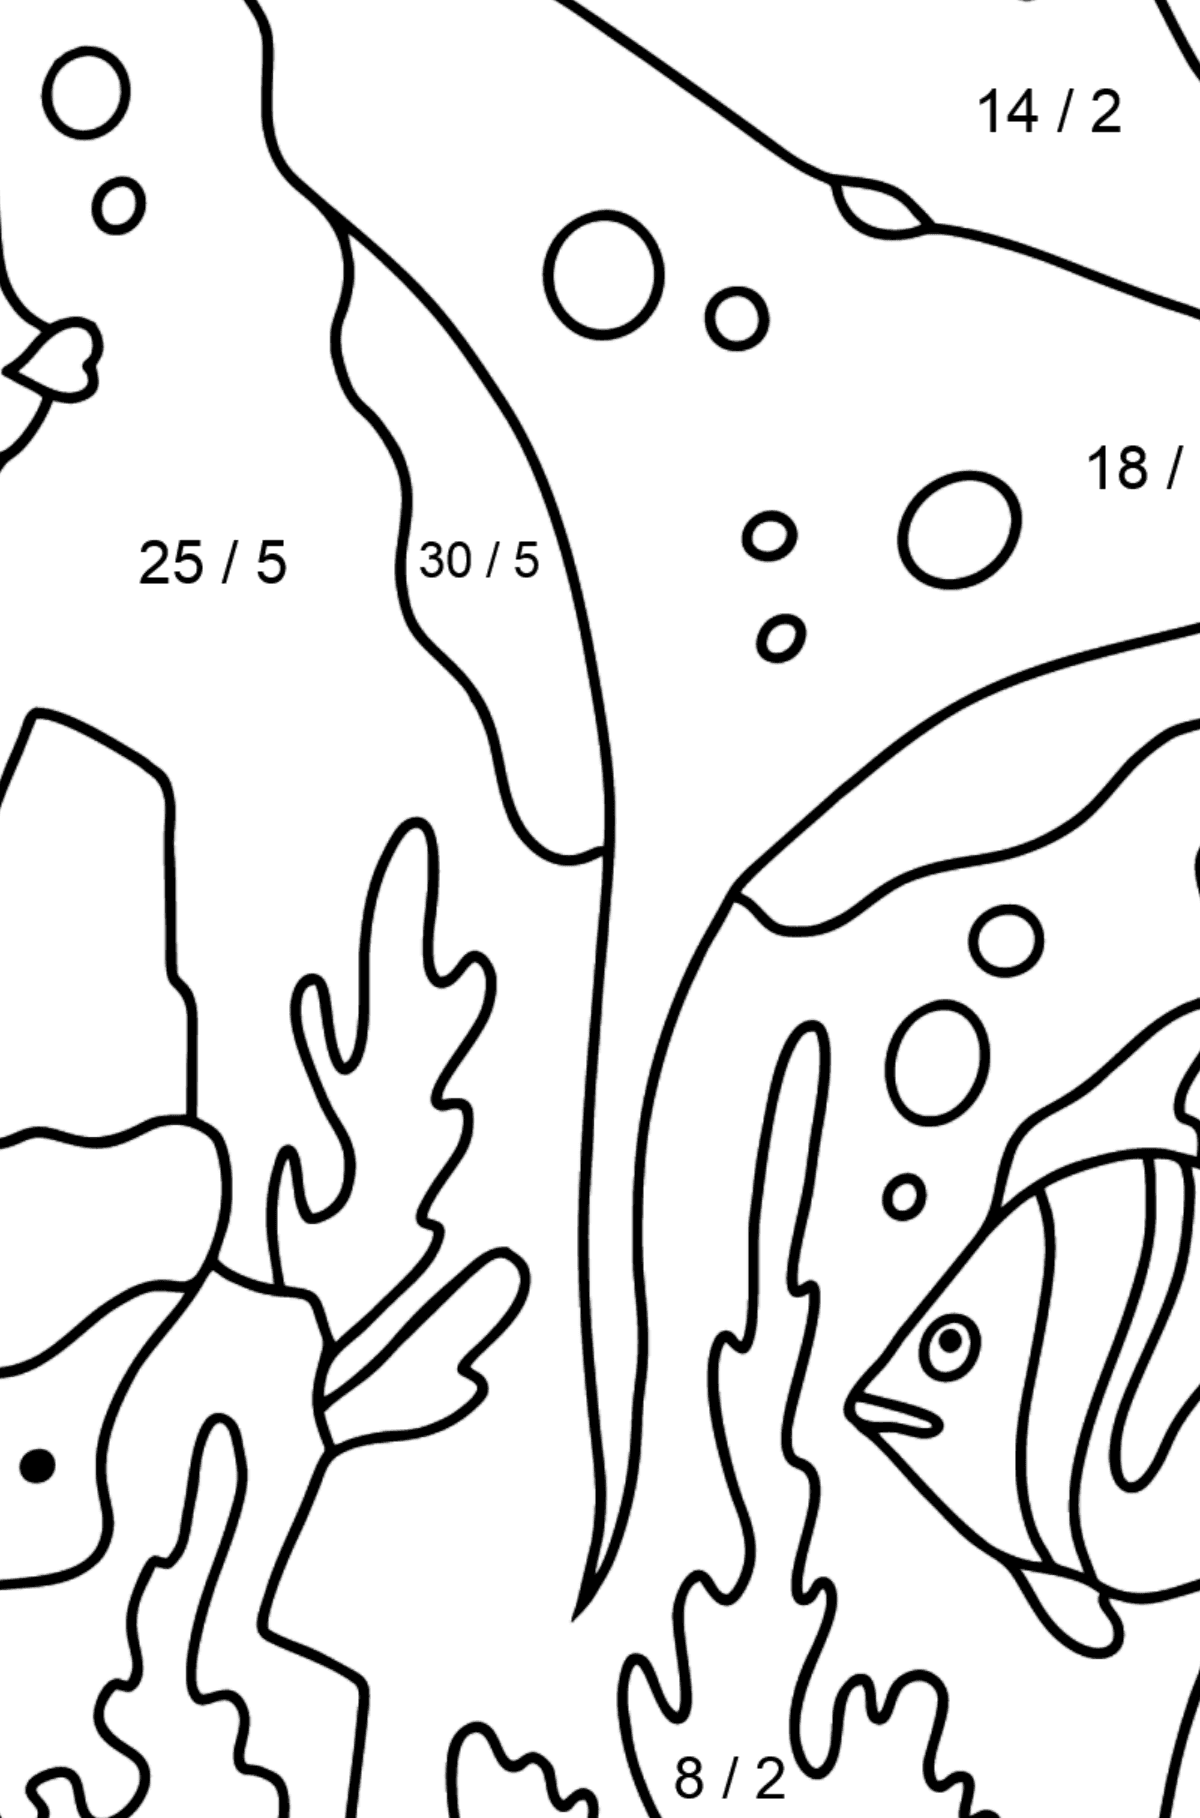 Coloring Page - Fish are Playing with a Charming Stingray - Math Coloring - Division for Kids